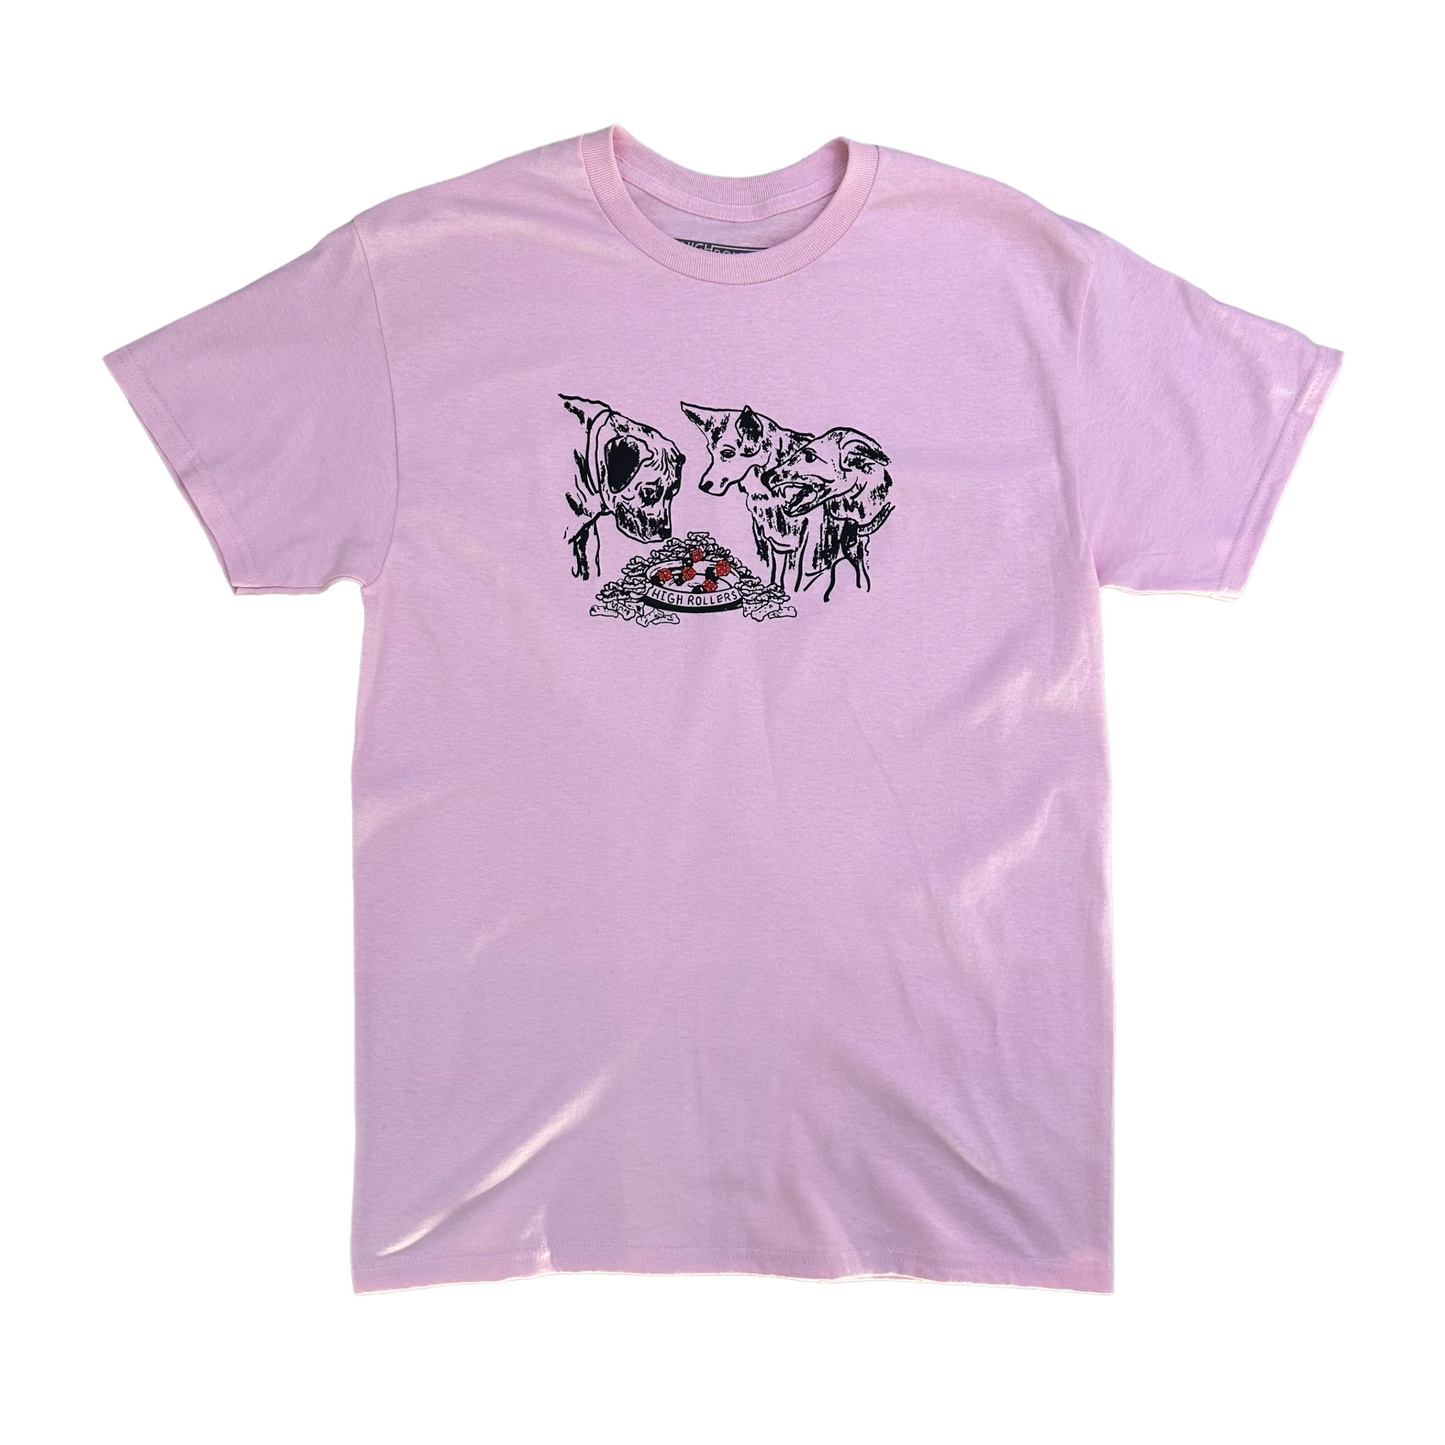 High Rollers - Doggie Dice Tee - Powder Pink